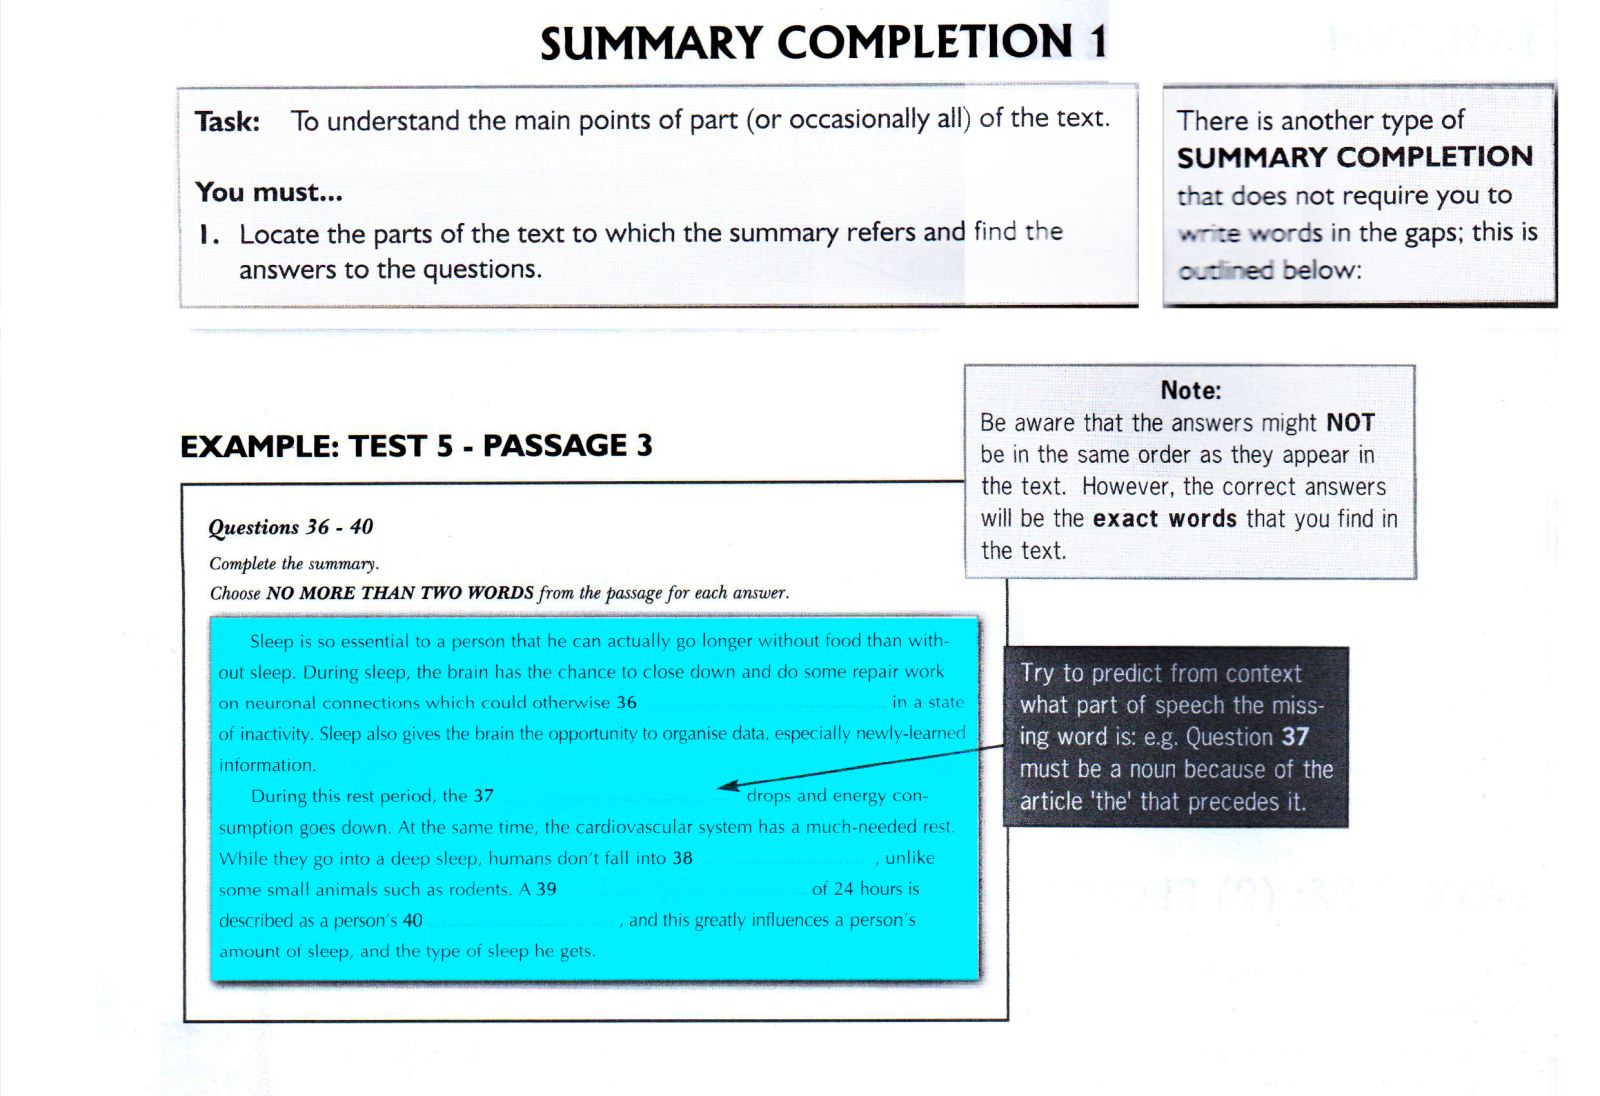 IELTS-Guide-Reading-9-summary-completion-1